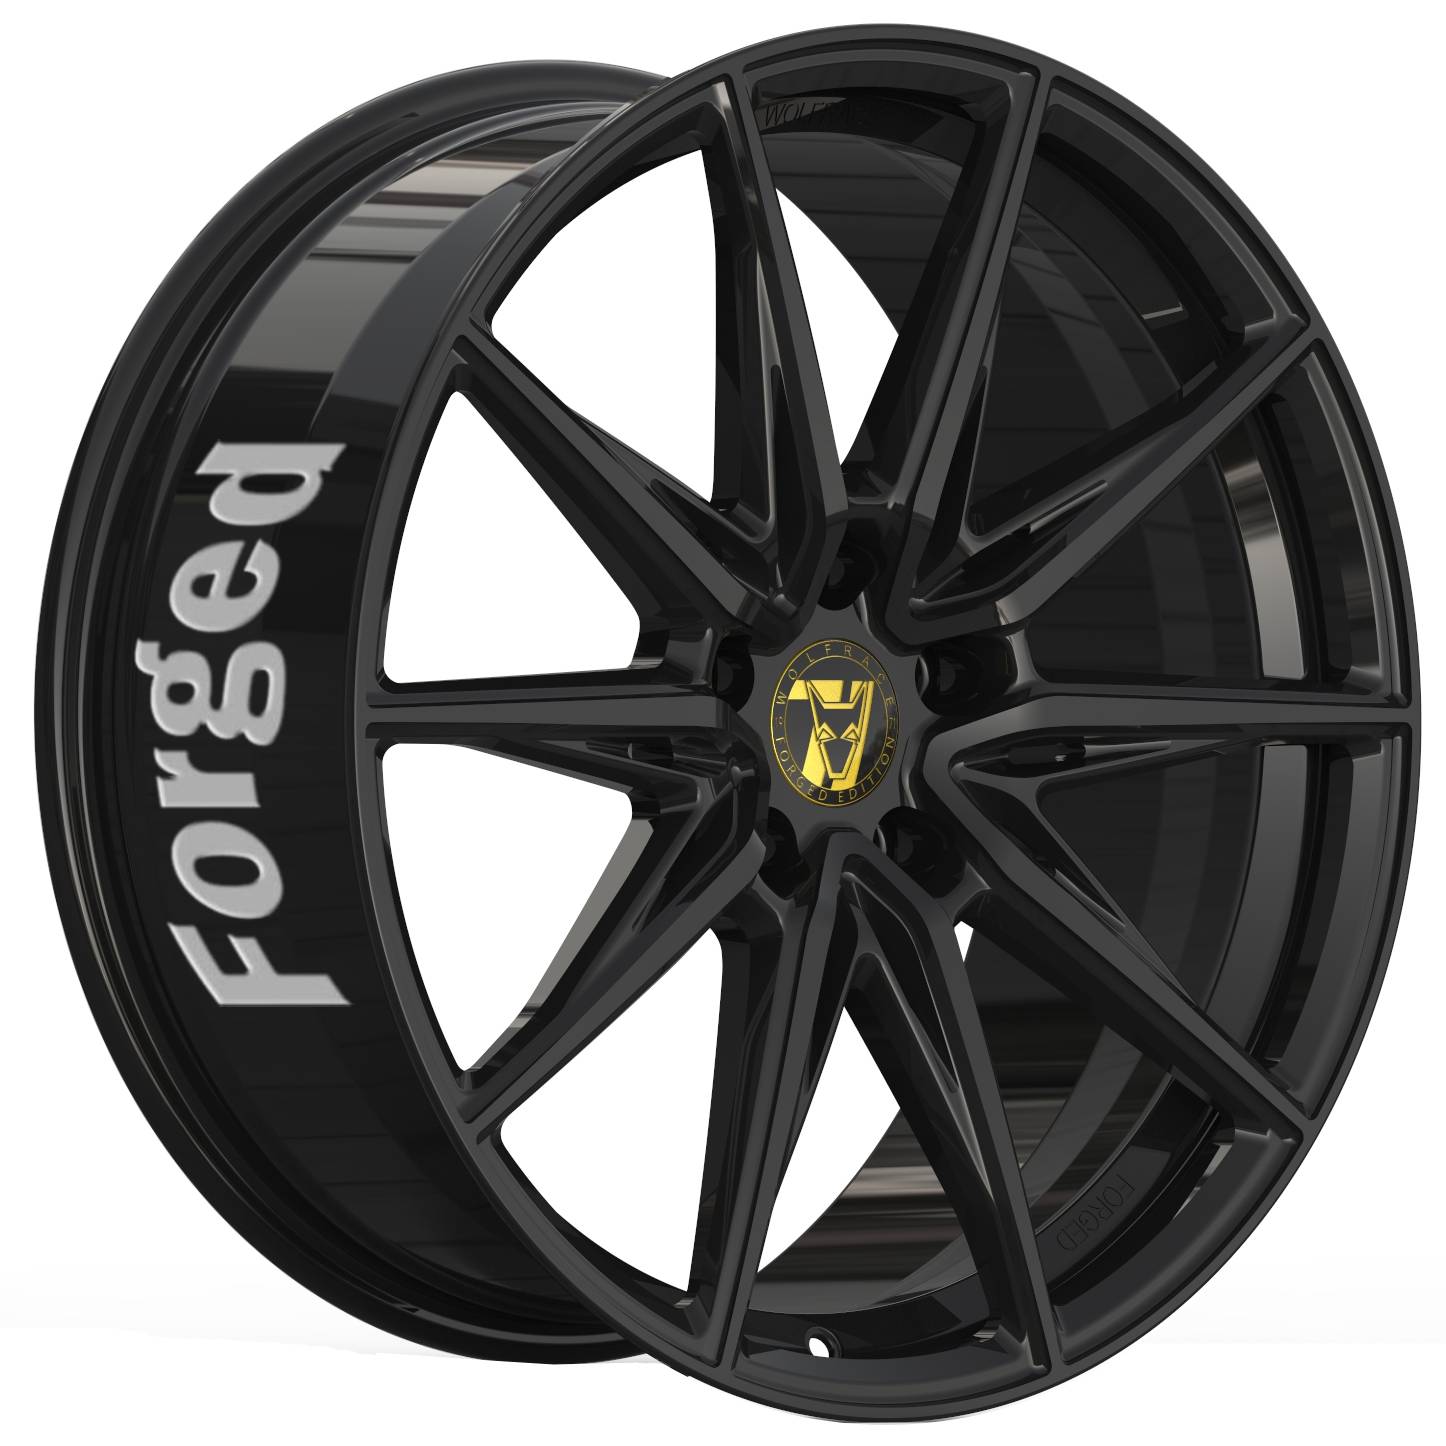 Demon Wheels 71 Forged Edition Urban Racer Forged [11.5x23] -5x115- ET 35